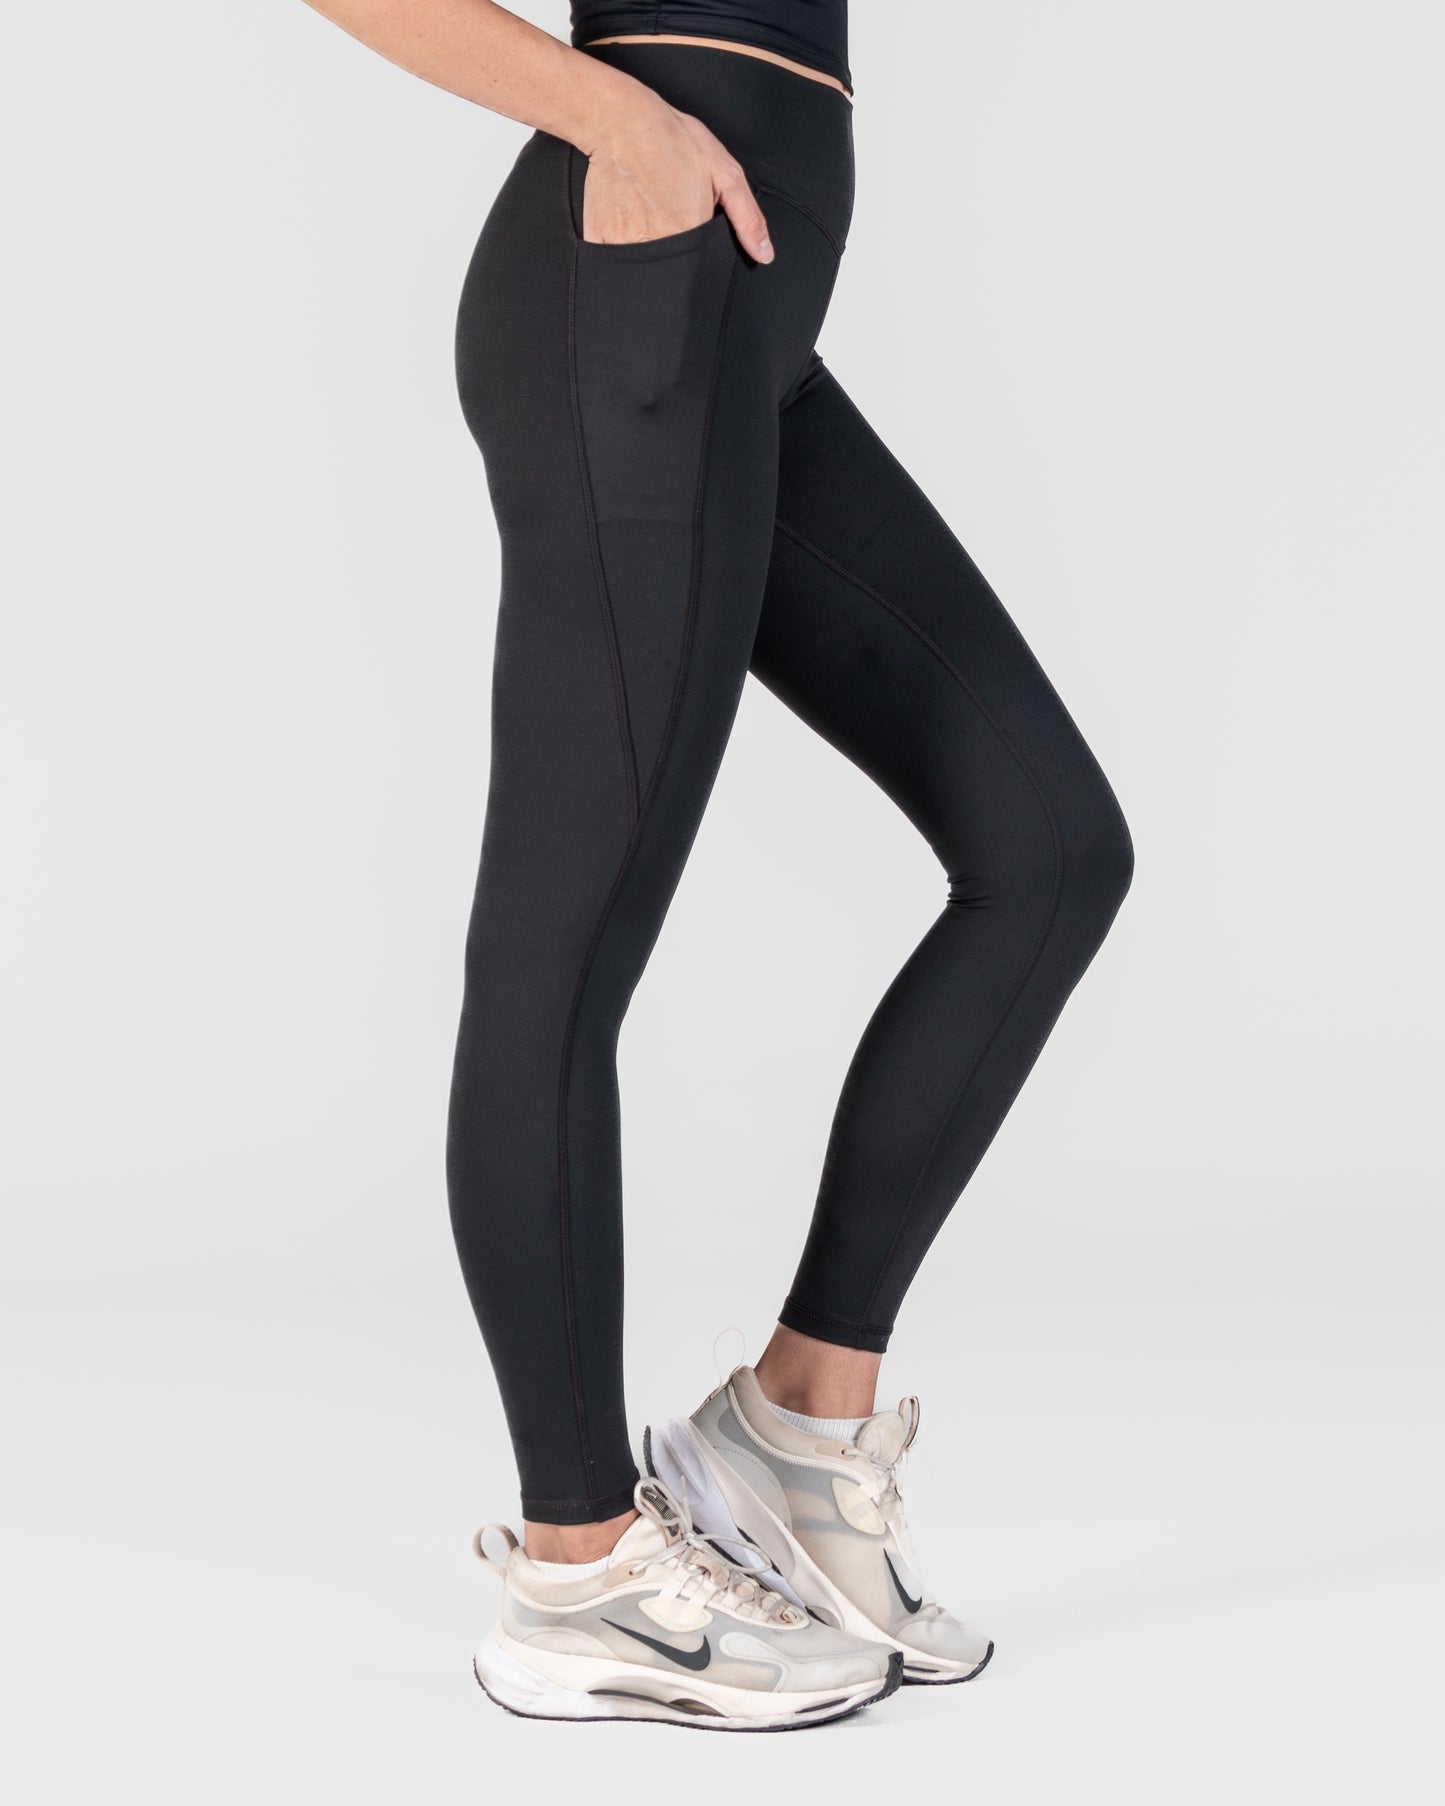 Senita Athletics - The Criss Cross Tights are baaaaack! We've made a few  adjustments and they're better than before! Sell out risk is high with  these bad boys, so snag 'em while